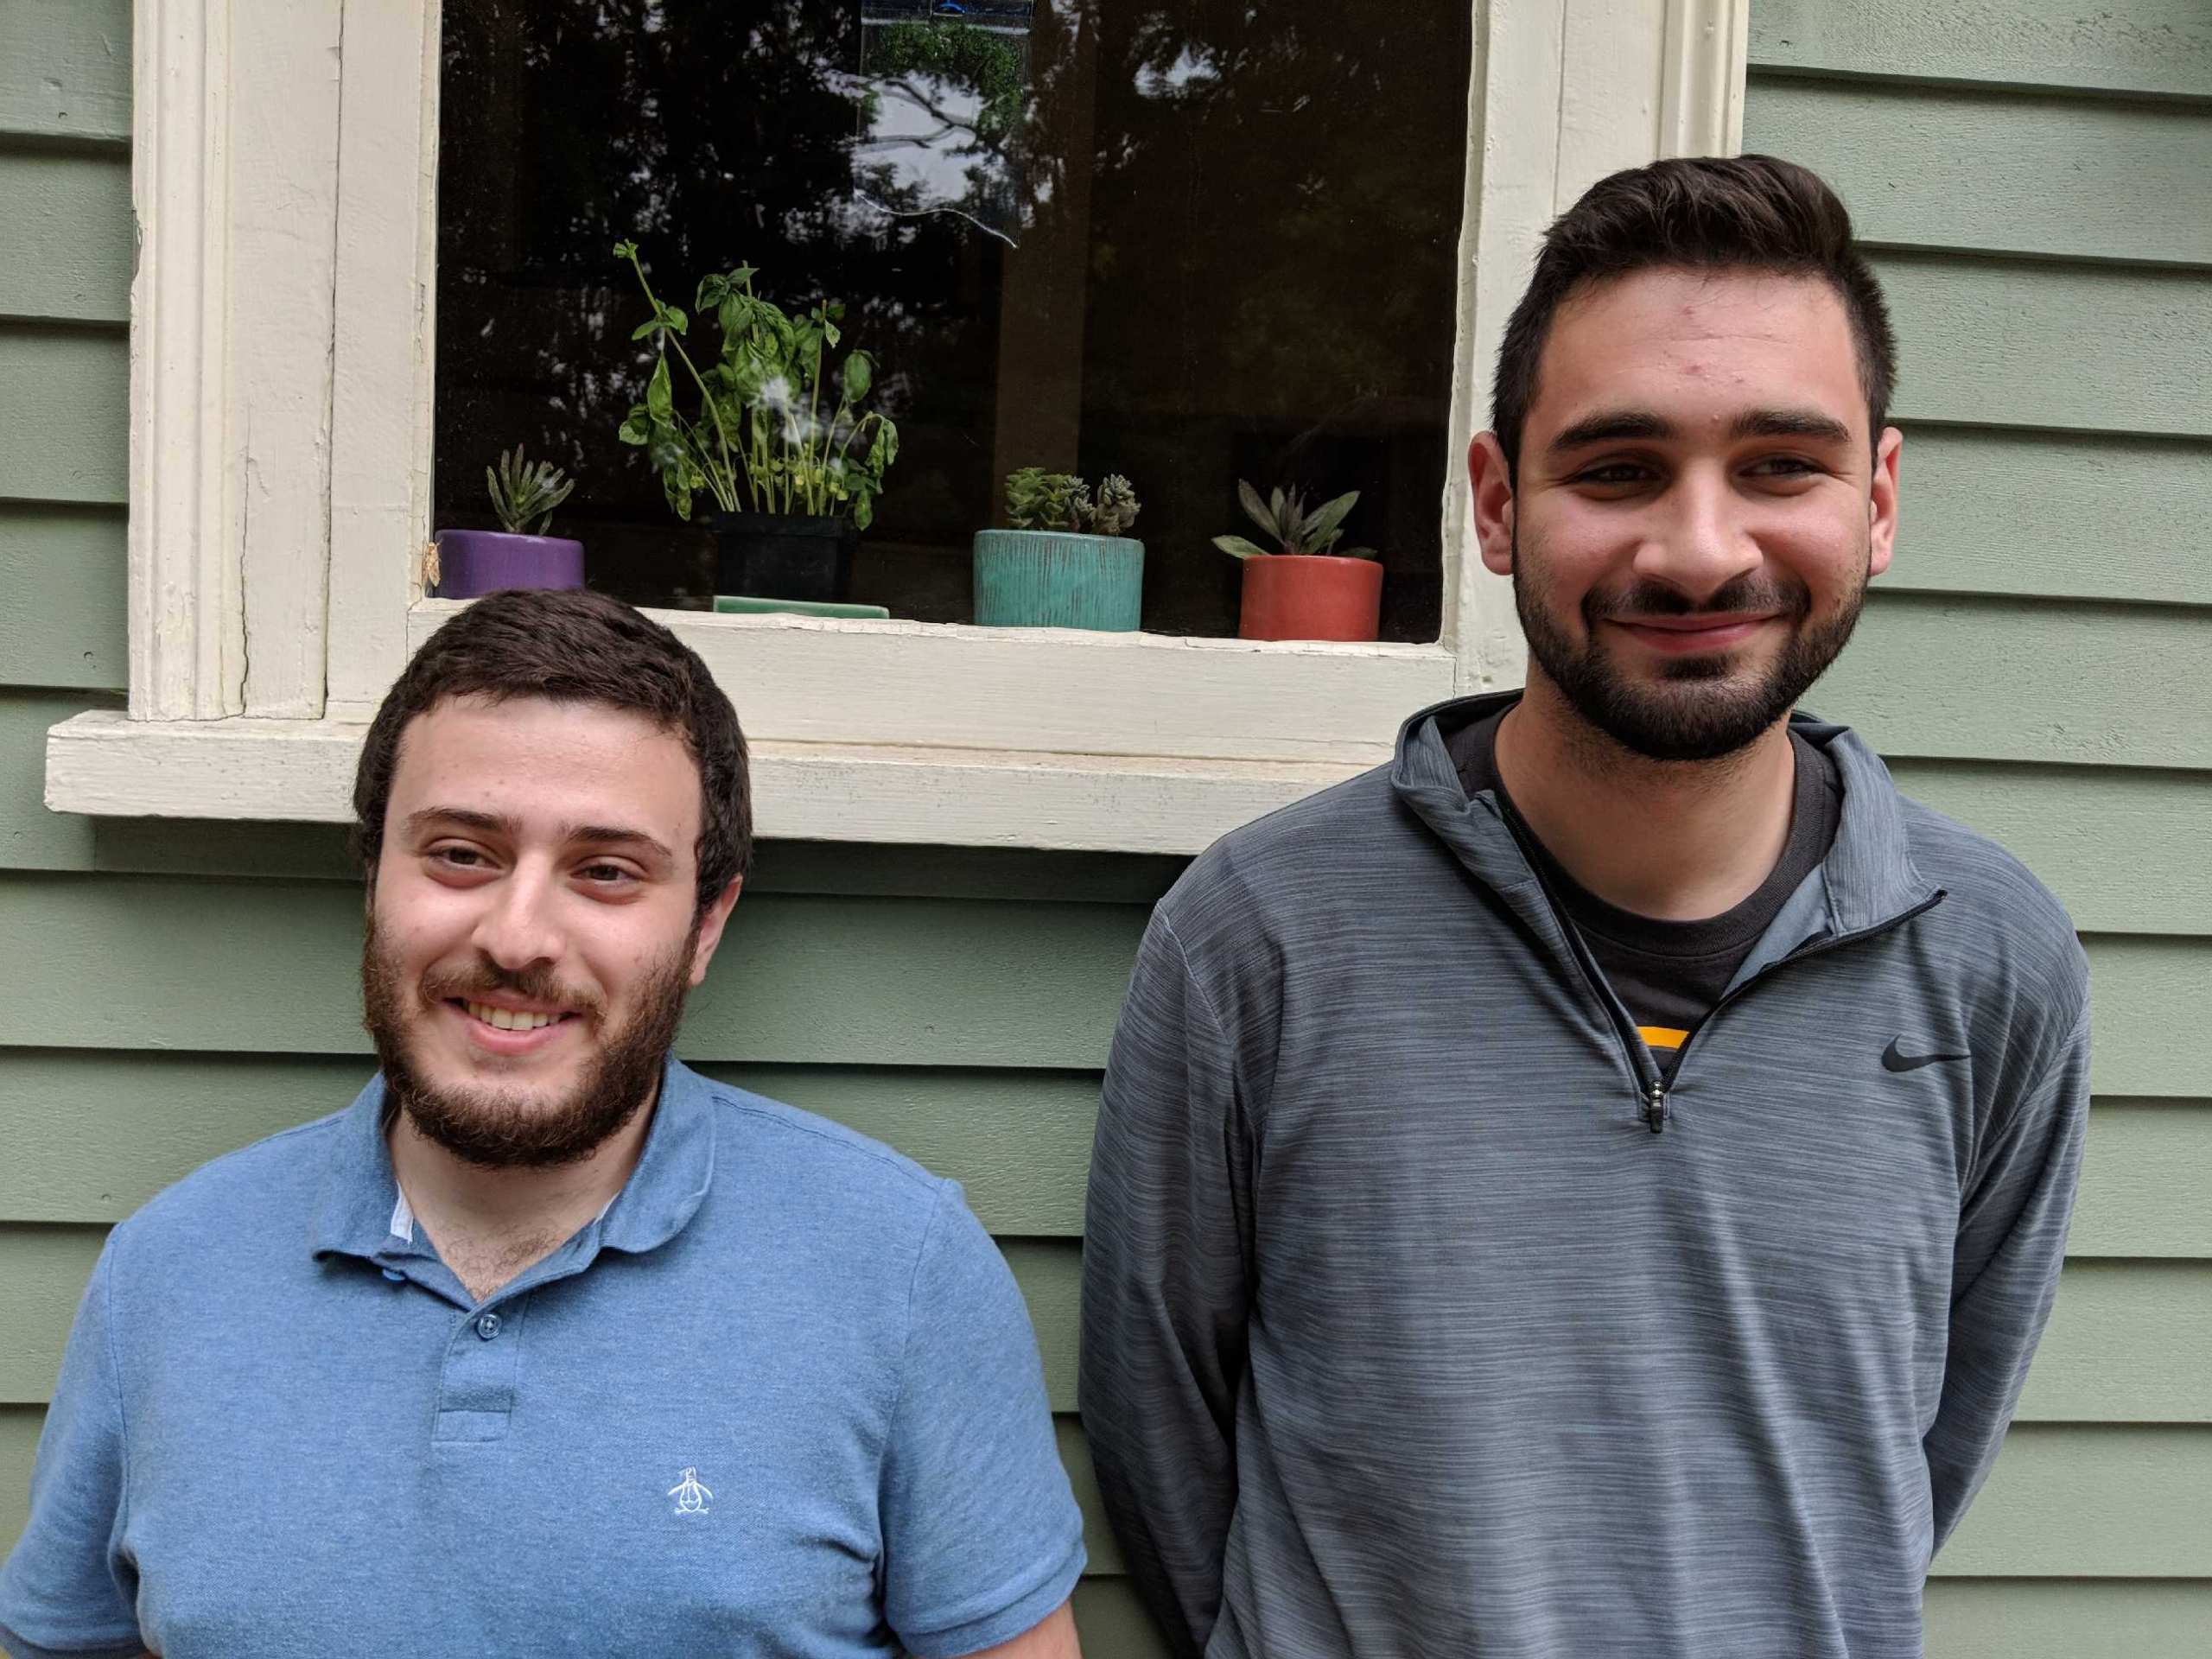 Follow this Fall 2018’s Office of Study Abroad & International Experiences Global Correspondent's, Paul Murphy and Zachary Krausman, on their studies in Budapest, Hungary!